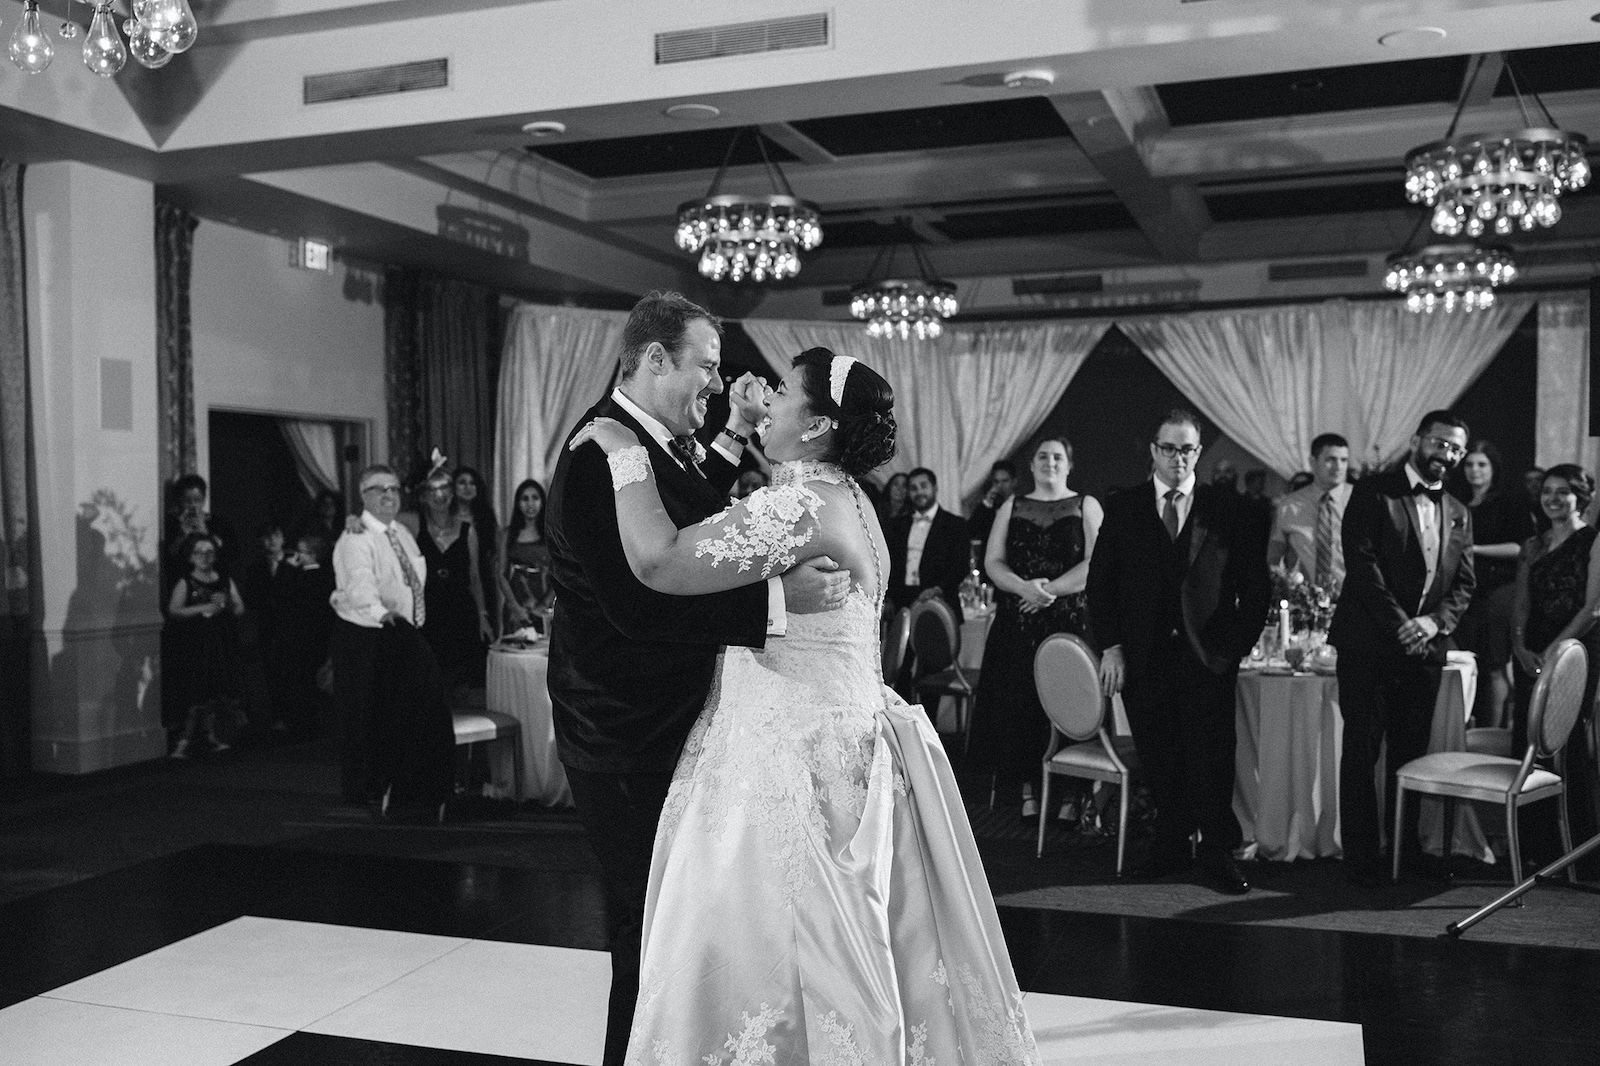 Black and White Wedding Photography | Bride and Groom First Dance at St. Pete Wedding Venue The Birchwood